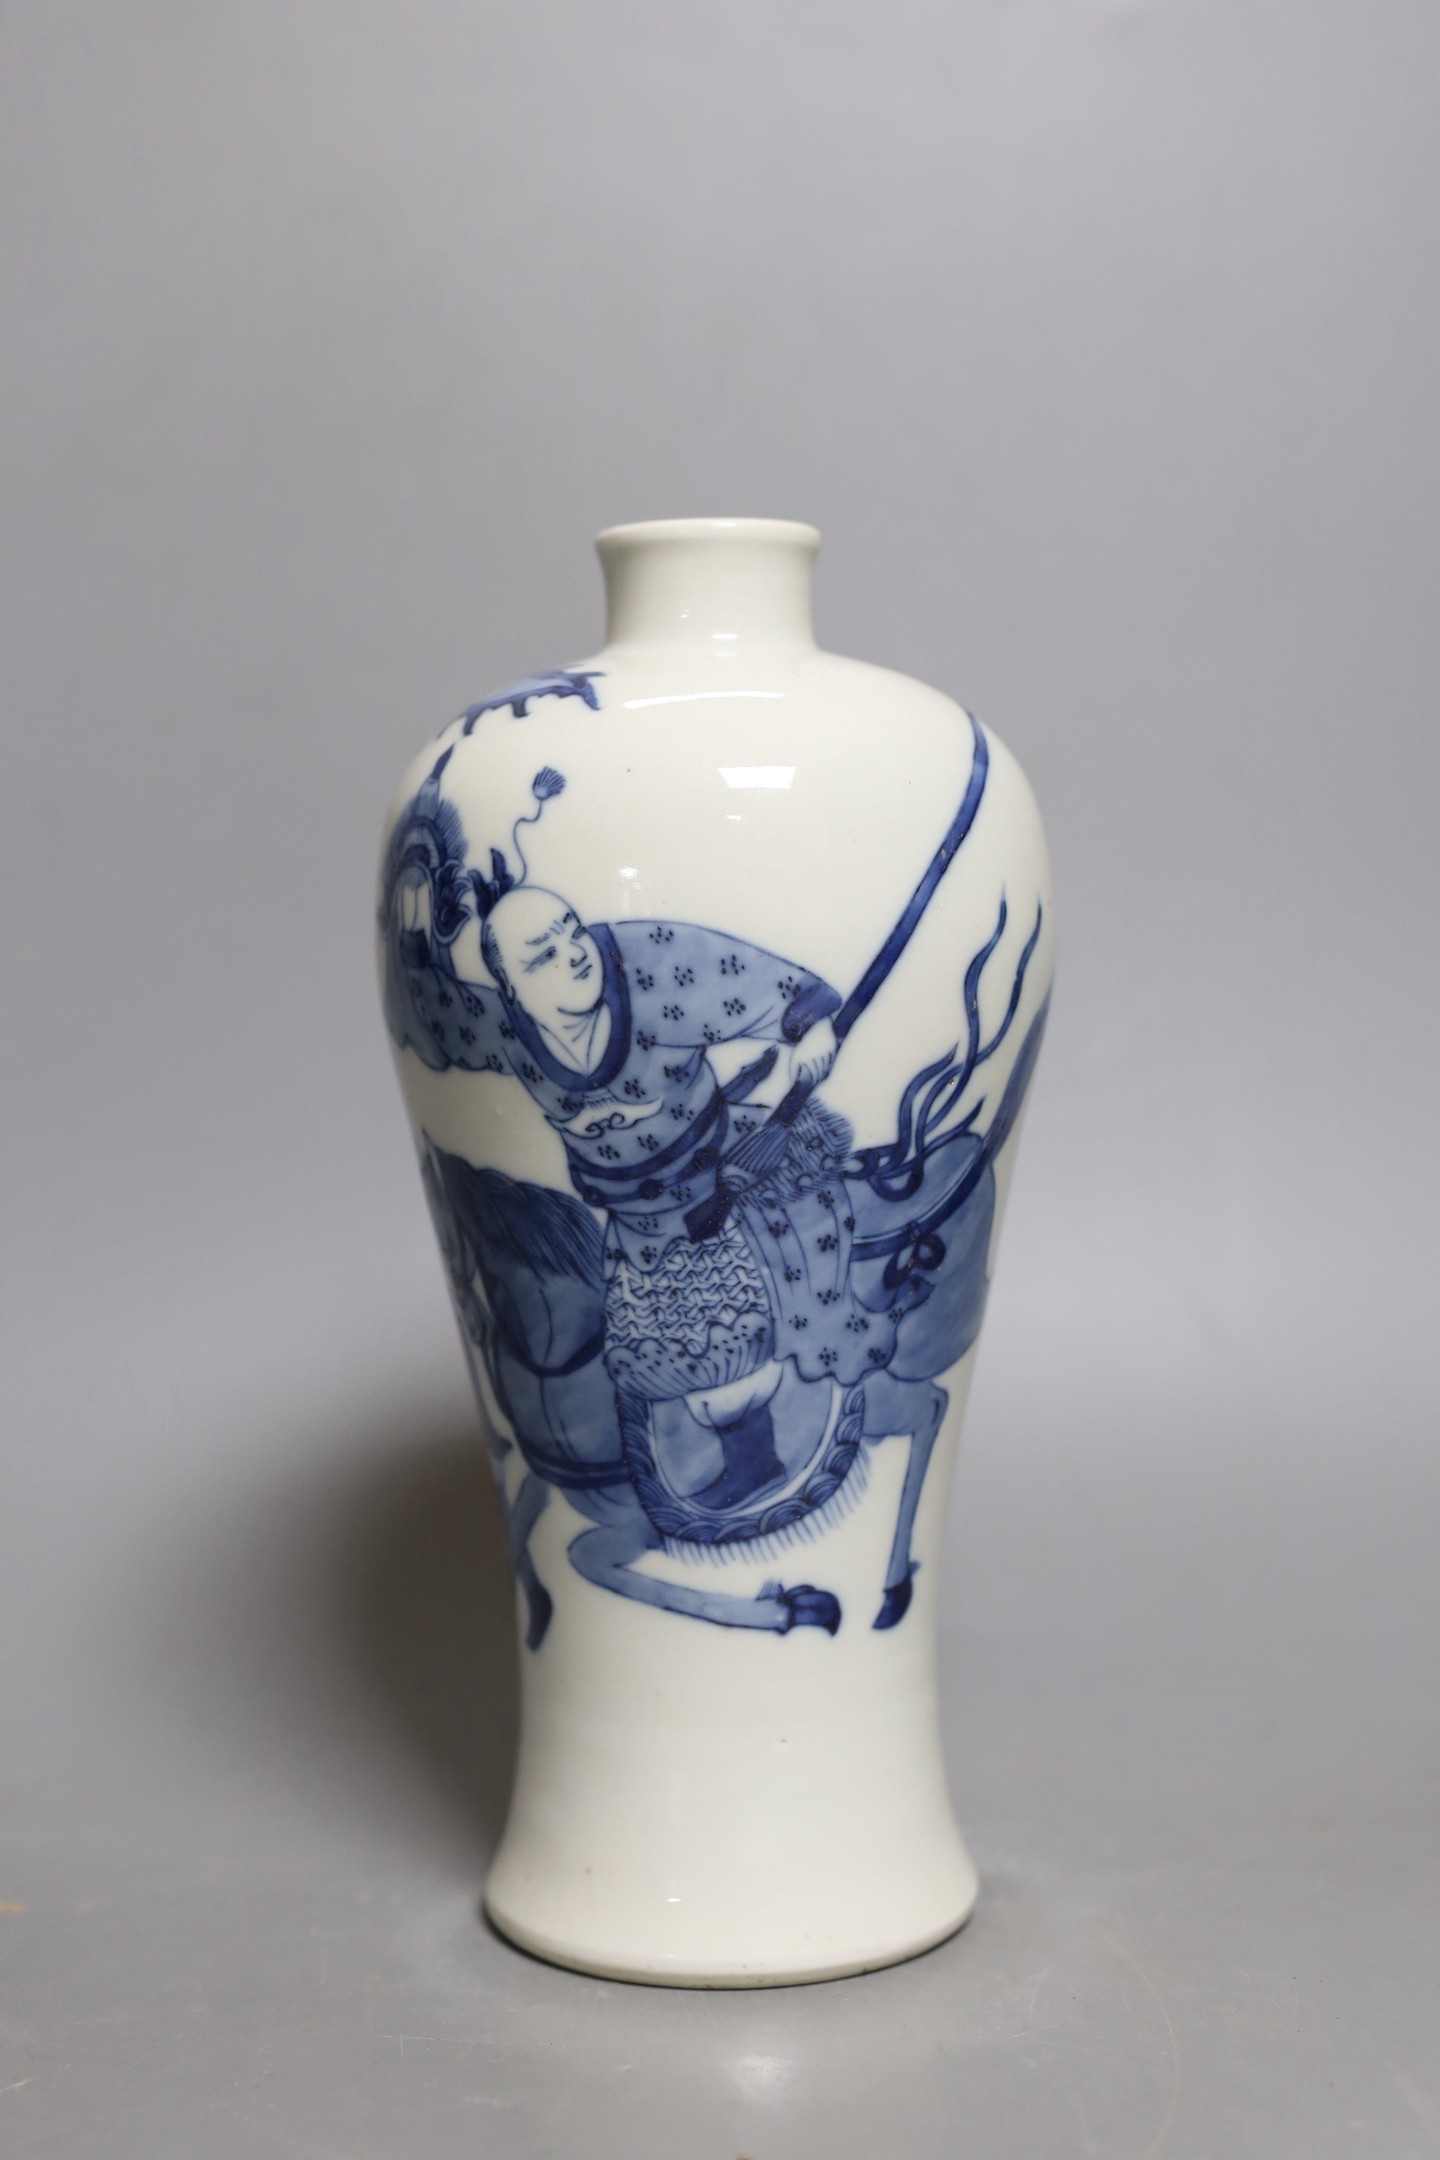 A Chinese blue and white baluster ‘warrior’ vase. 22cm tall